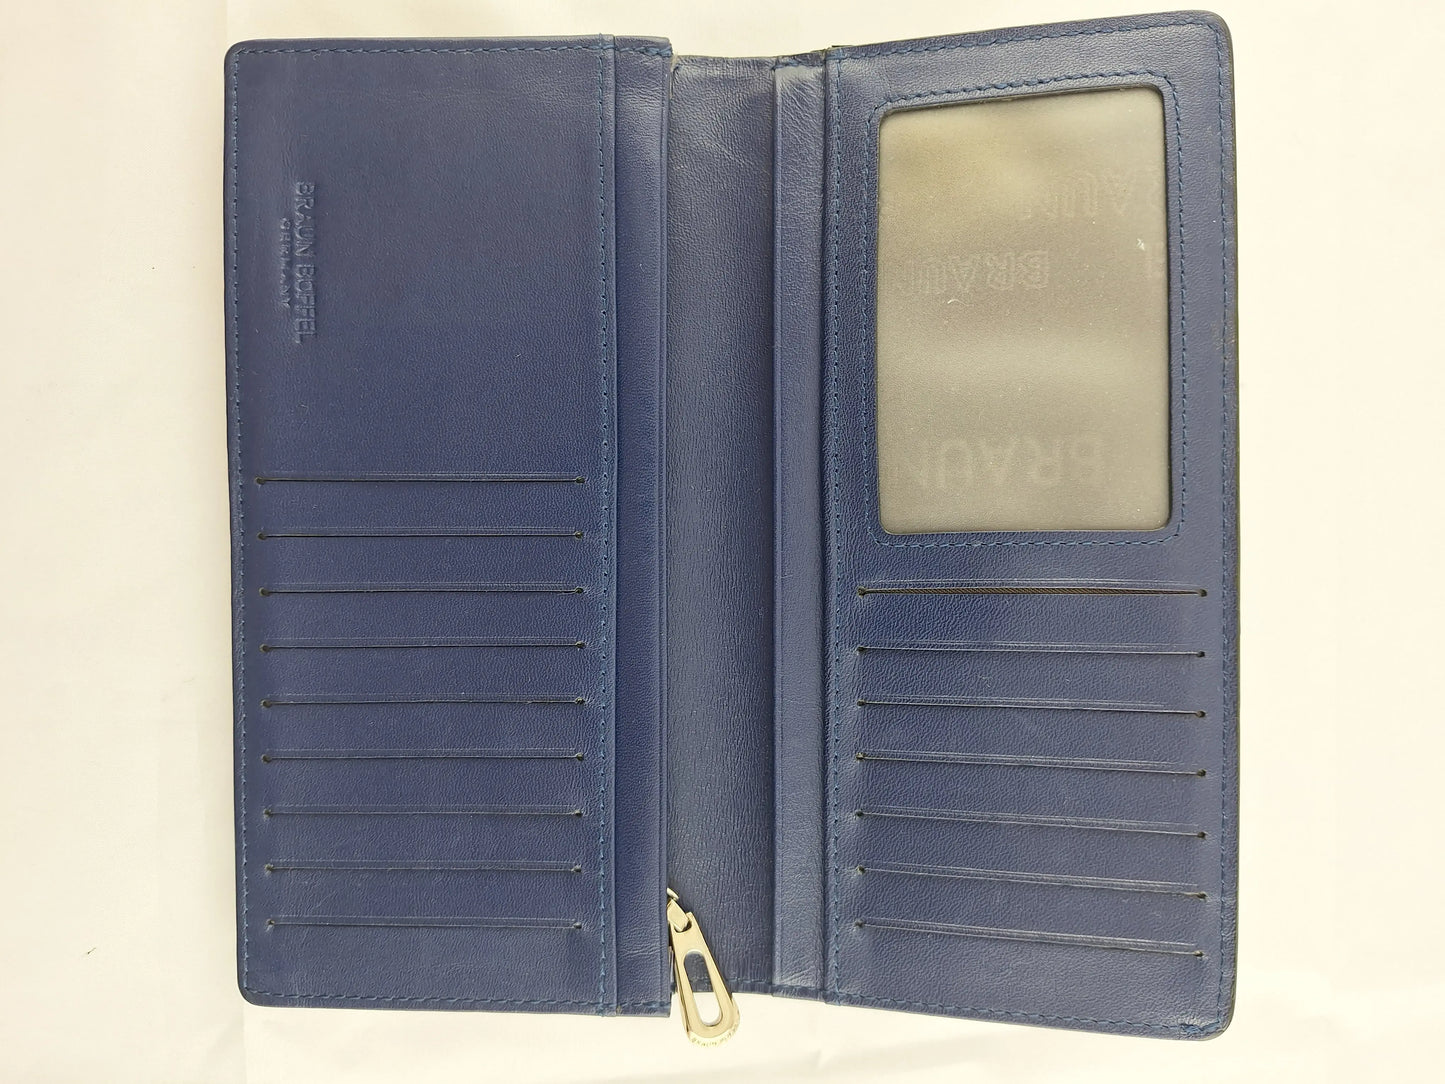 Braun Buffel Long Wallet Size OSFA by SwapUp-Online Second Hand Store-Online Thrift Store